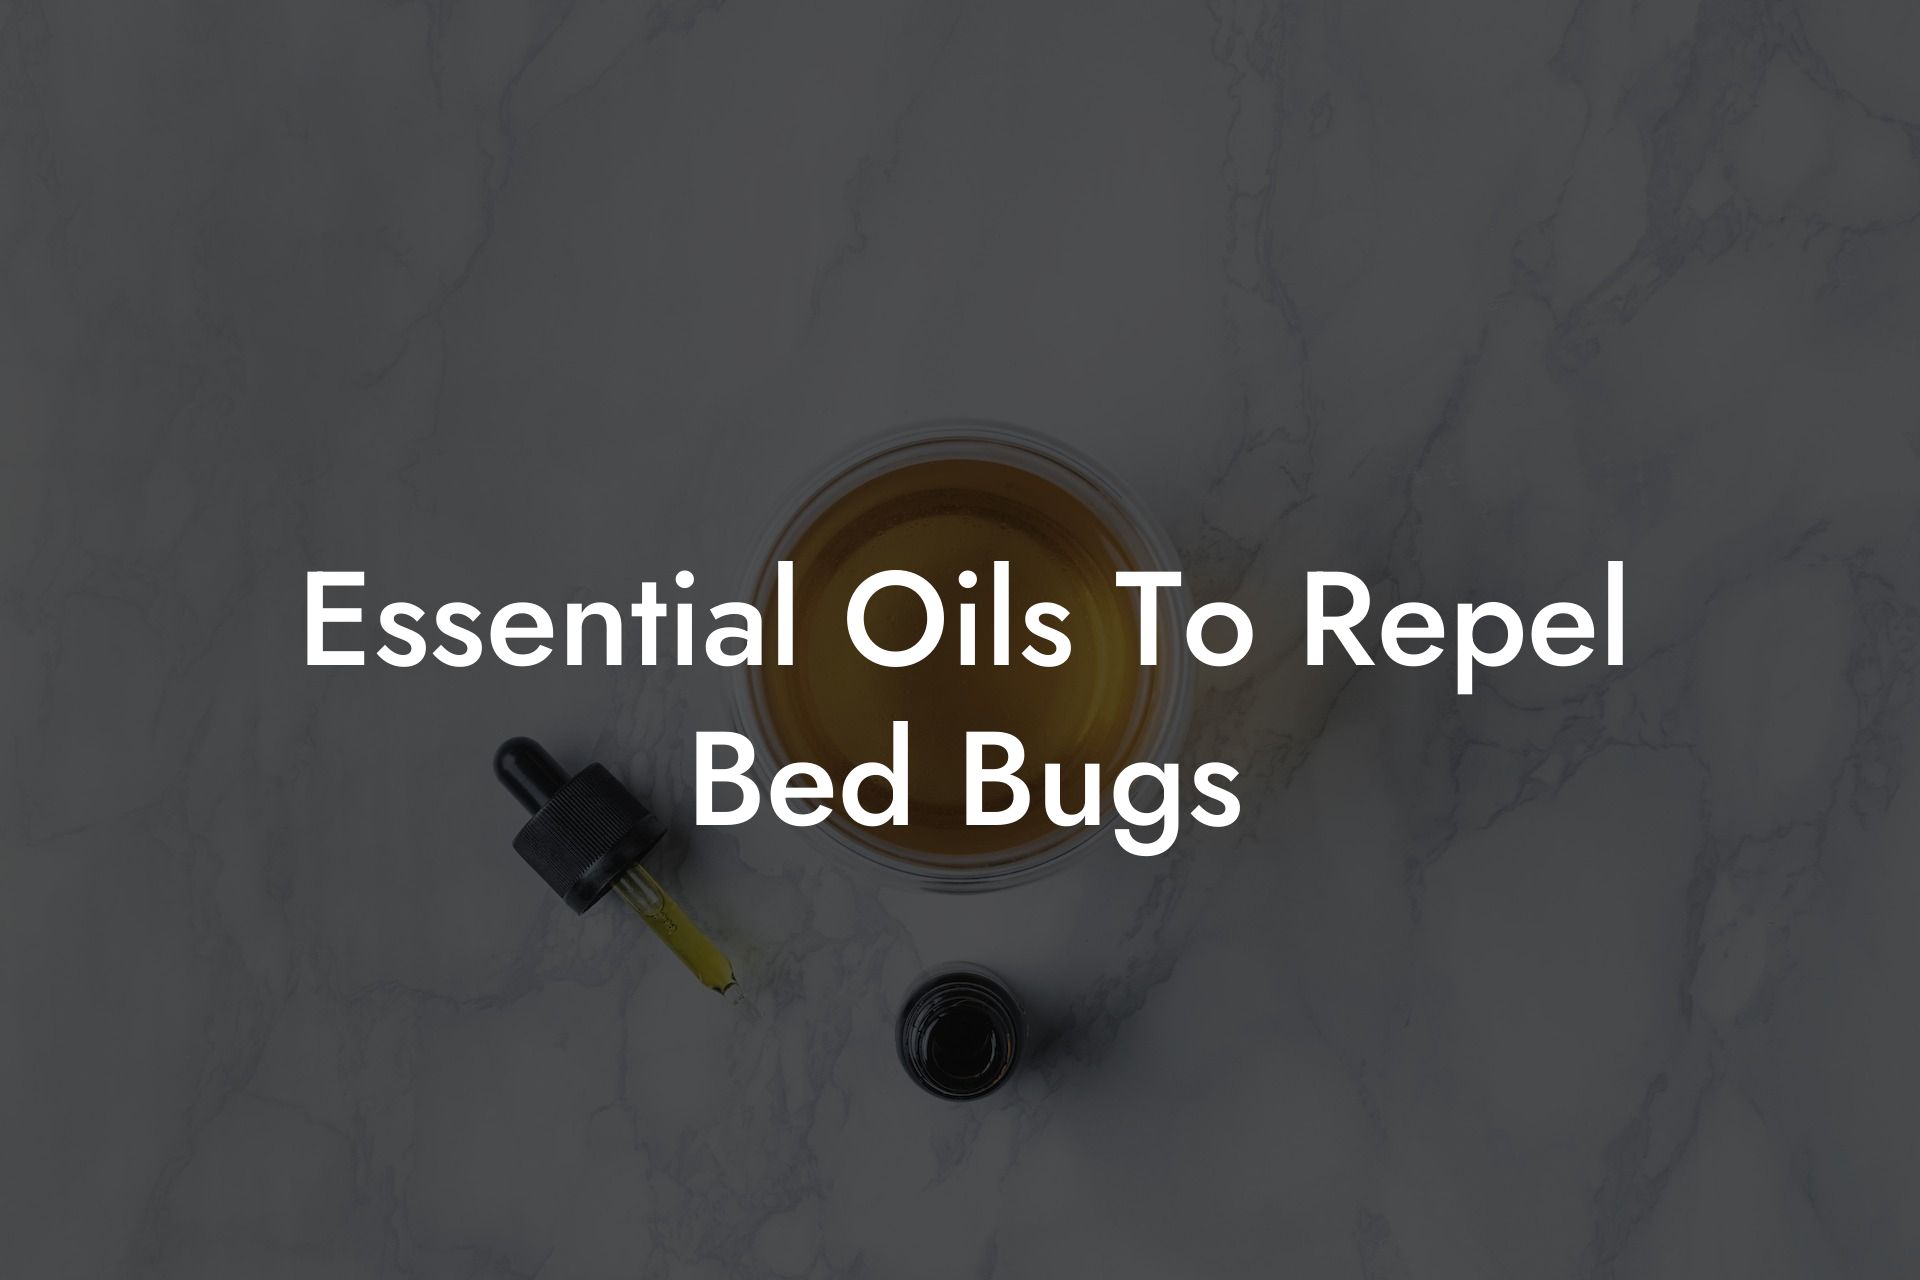 Essential Oils To Repel Bed Bugs